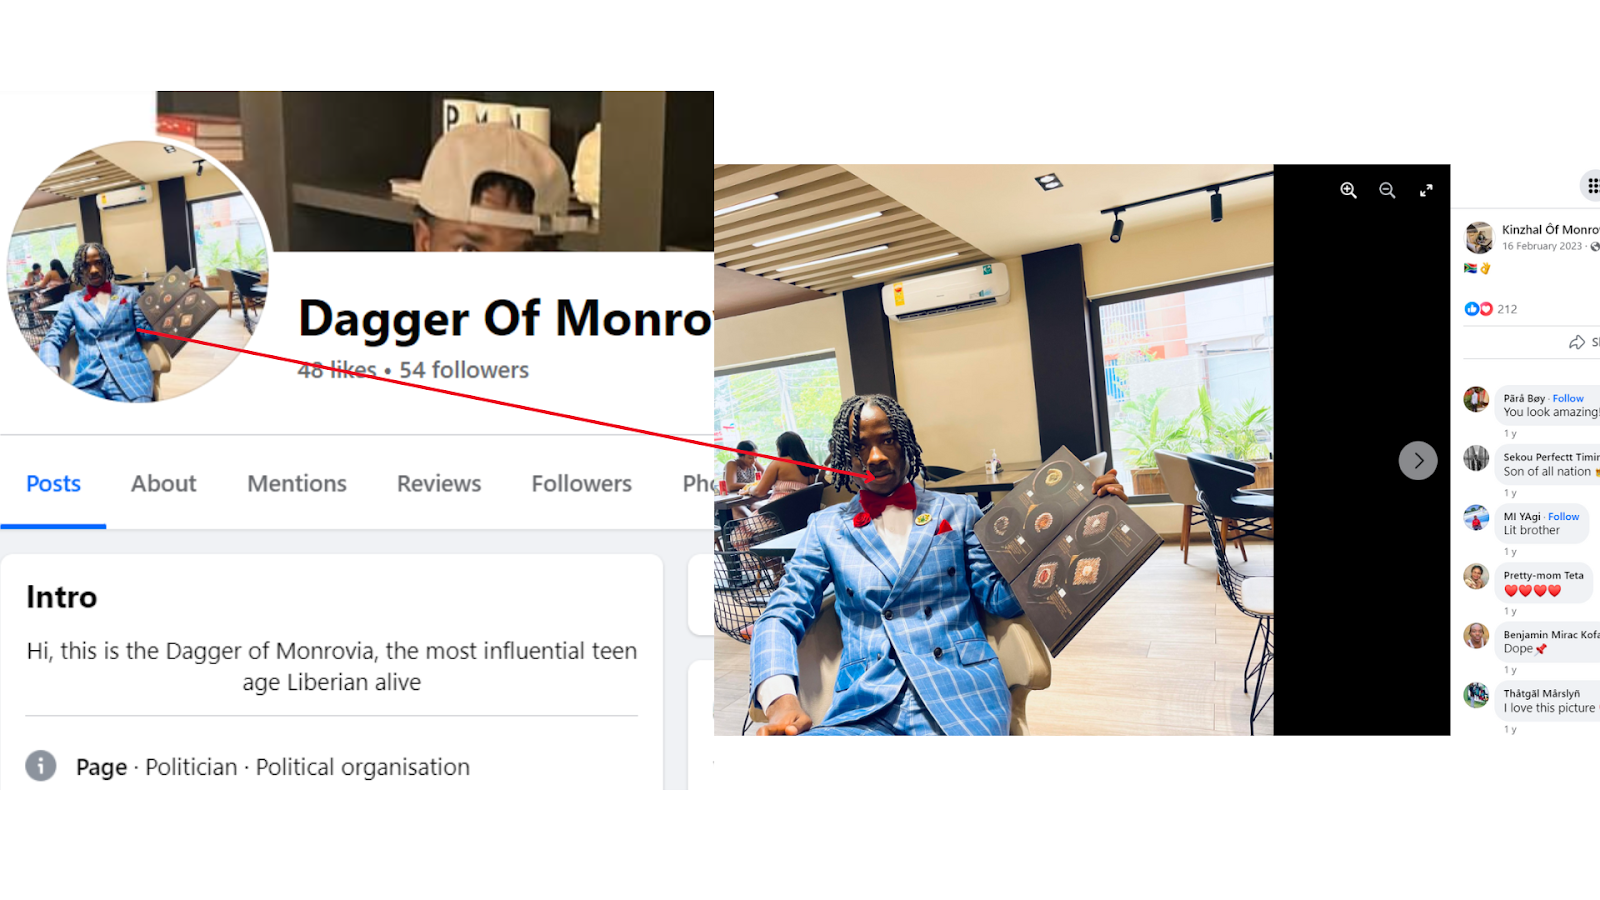 Caption: The picture on the Dagger of Monrovia account can be found on Kinzhal's Facebook profile